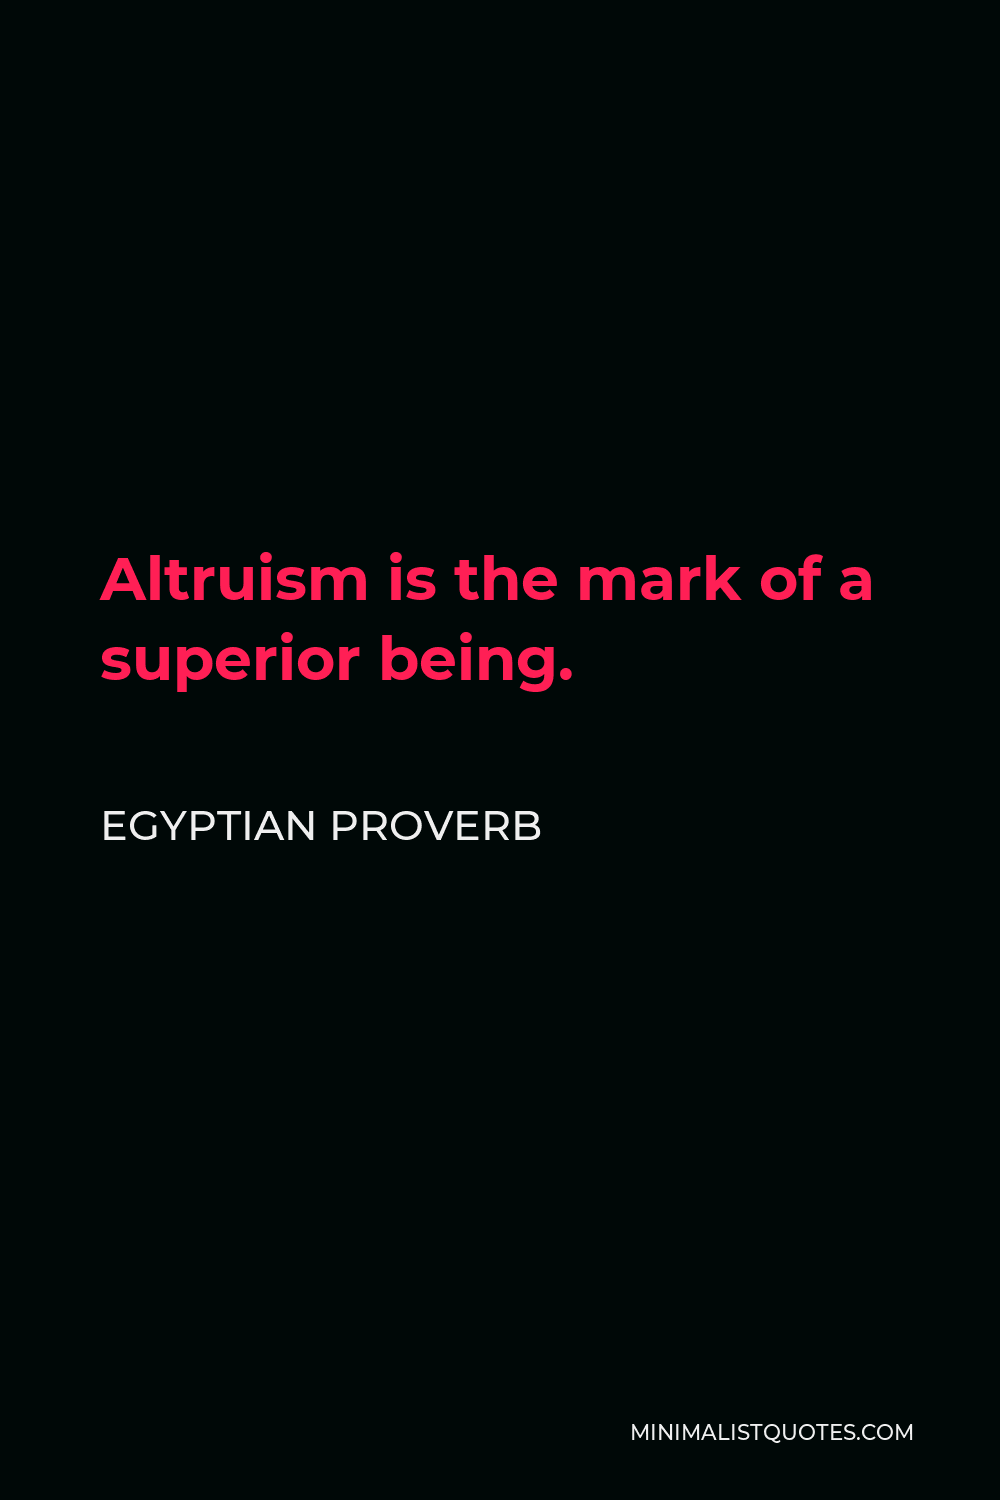 Egyptian Proverb Quote - Altruism is the mark of a superior being.